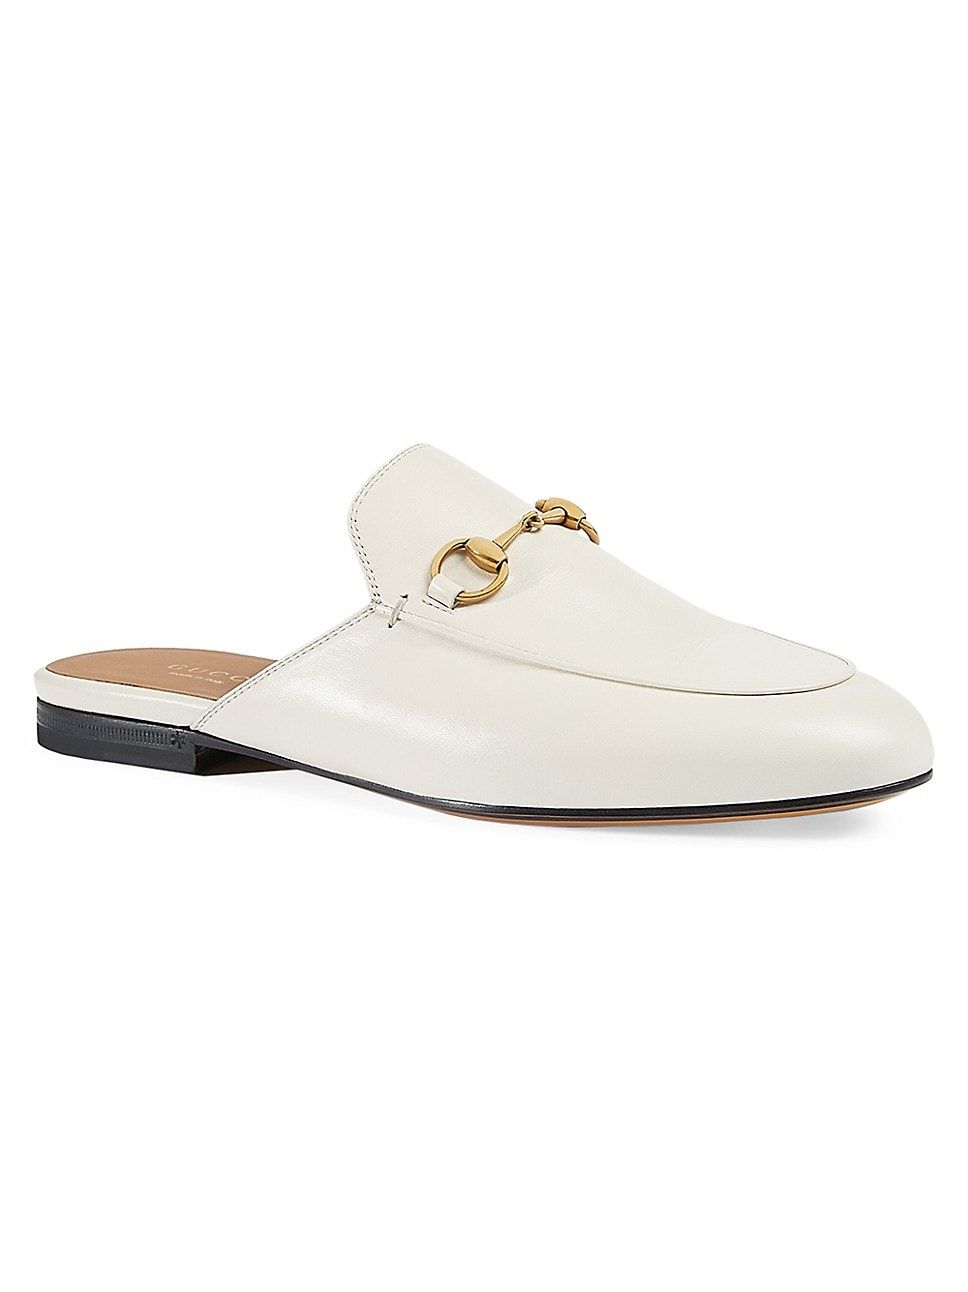 Princetown Leather Slipper | Saks Fifth Avenue